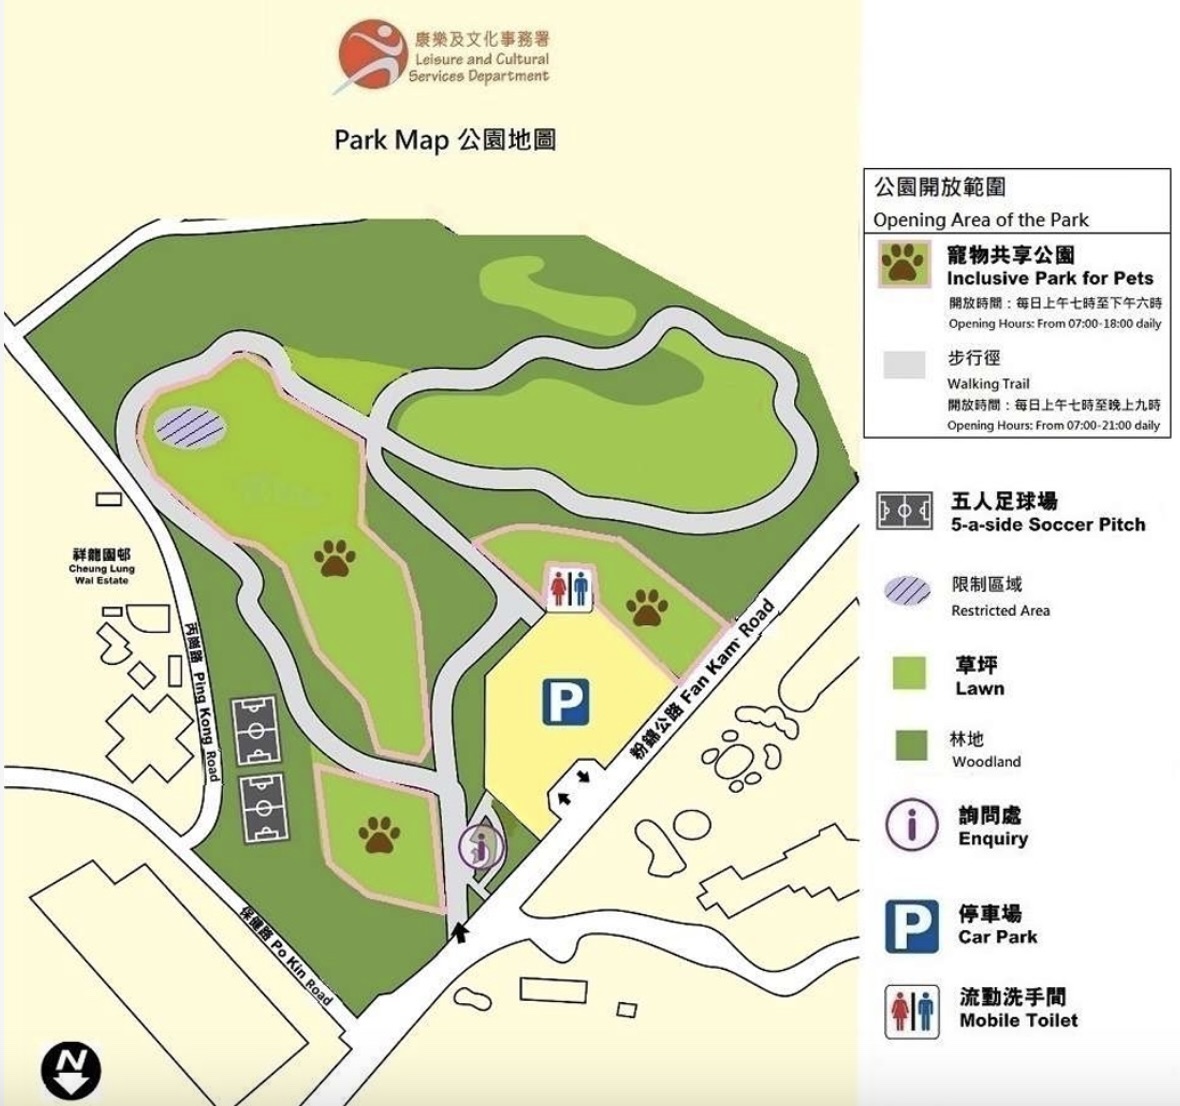 A map showing the layout of the new park and the facilities available to the public. There is woodland area to the south, and pet-inclusive sections further to the north. There are also two 5-a-side soccer pitches. 